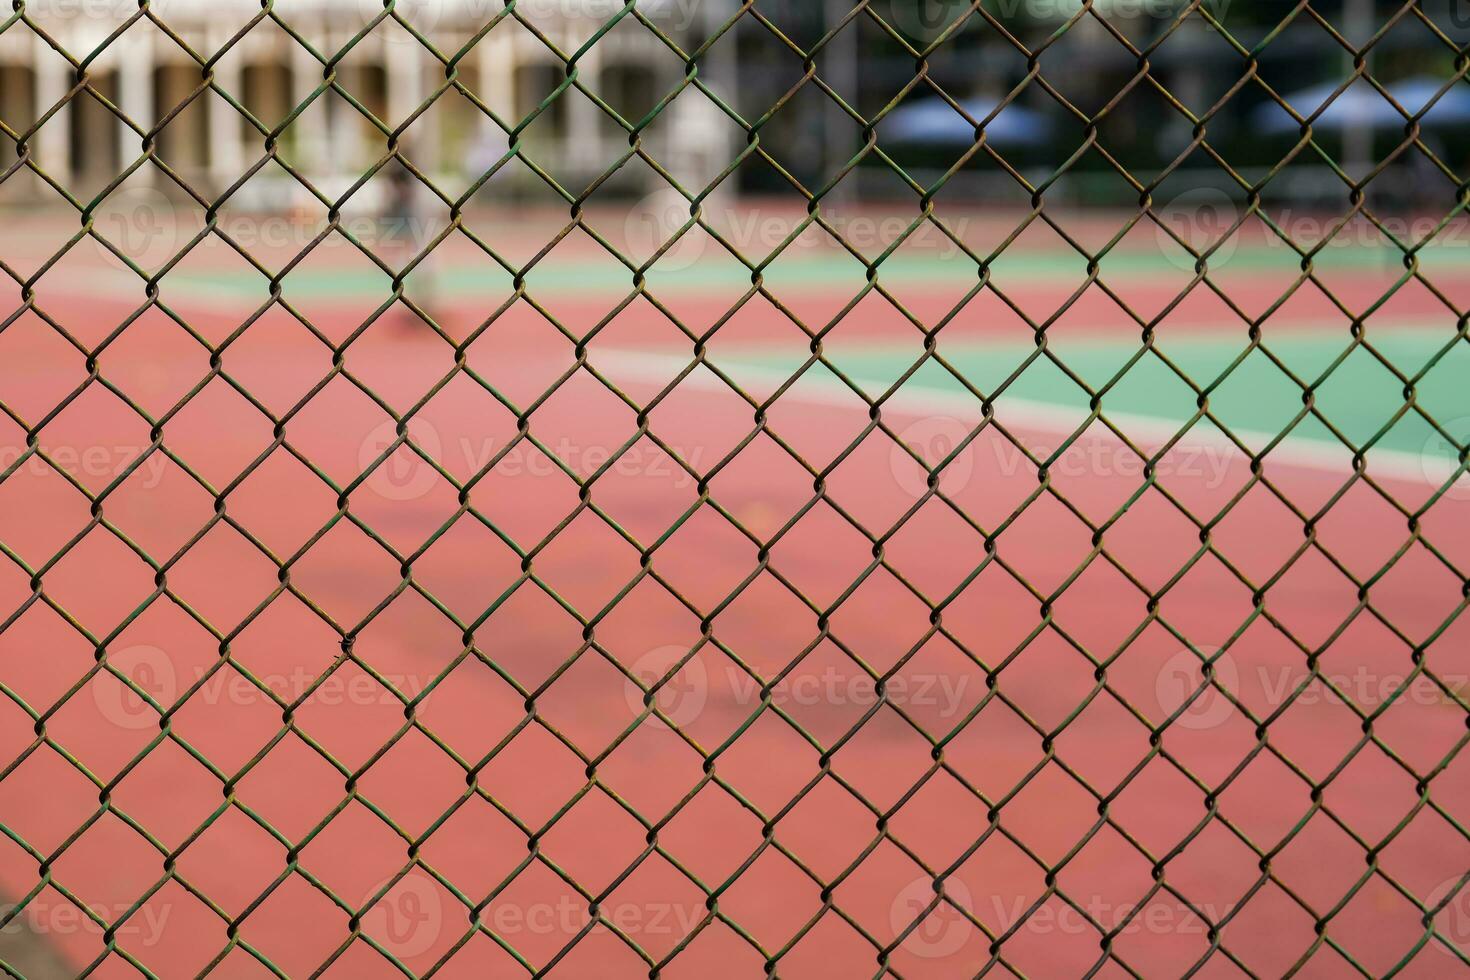 Metal mesh on a blurred background of a tennis court with players. photo